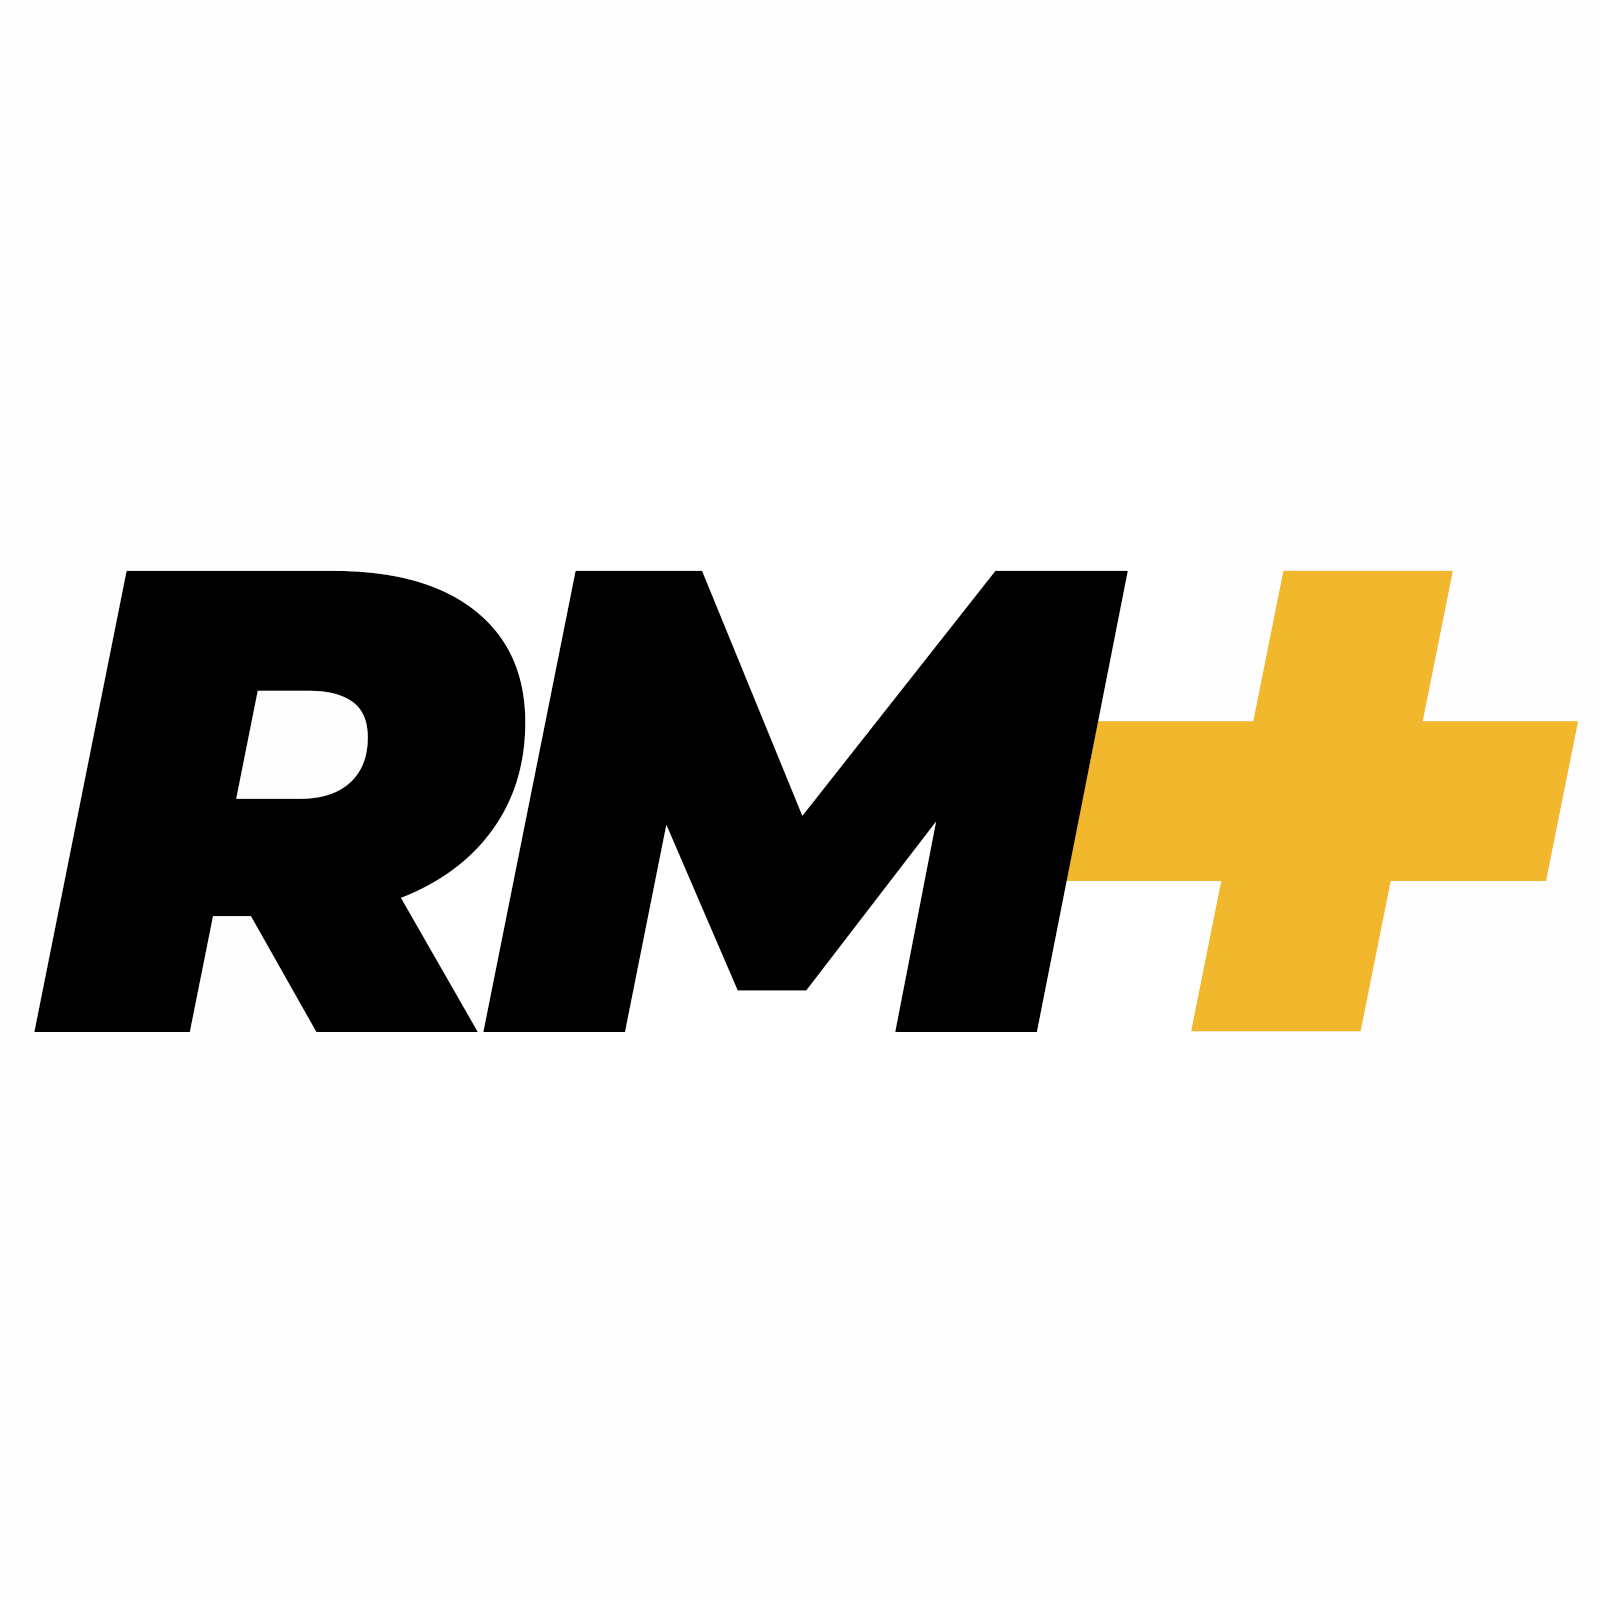 An italicized capital letter R, M, and plus symbol